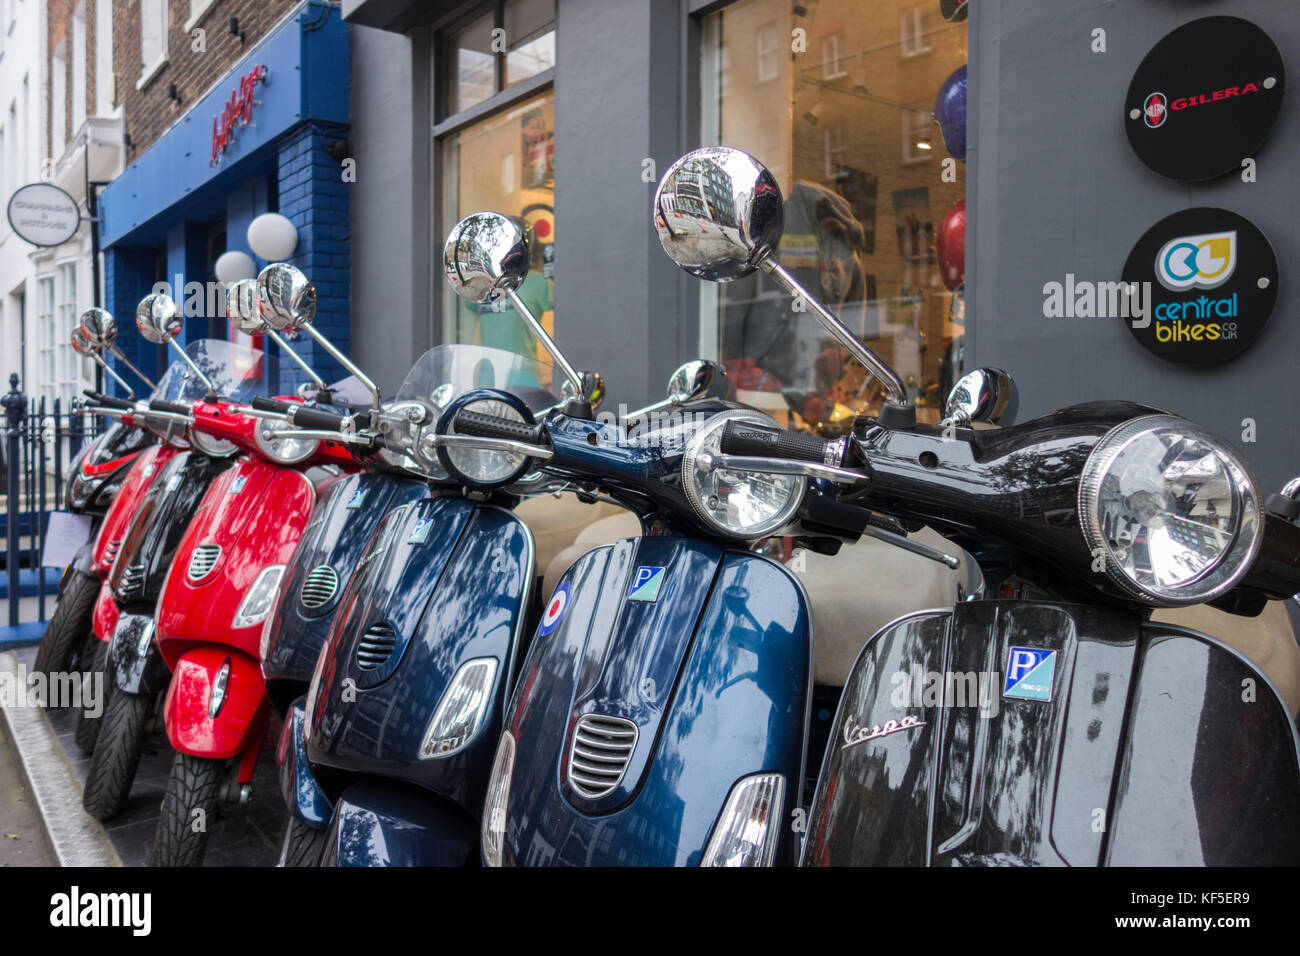 Central Bikes, a scooter, motorbikes and accessories shop on Charlotte  Street in Fitzrovia, central London Stock Photo - Alamy